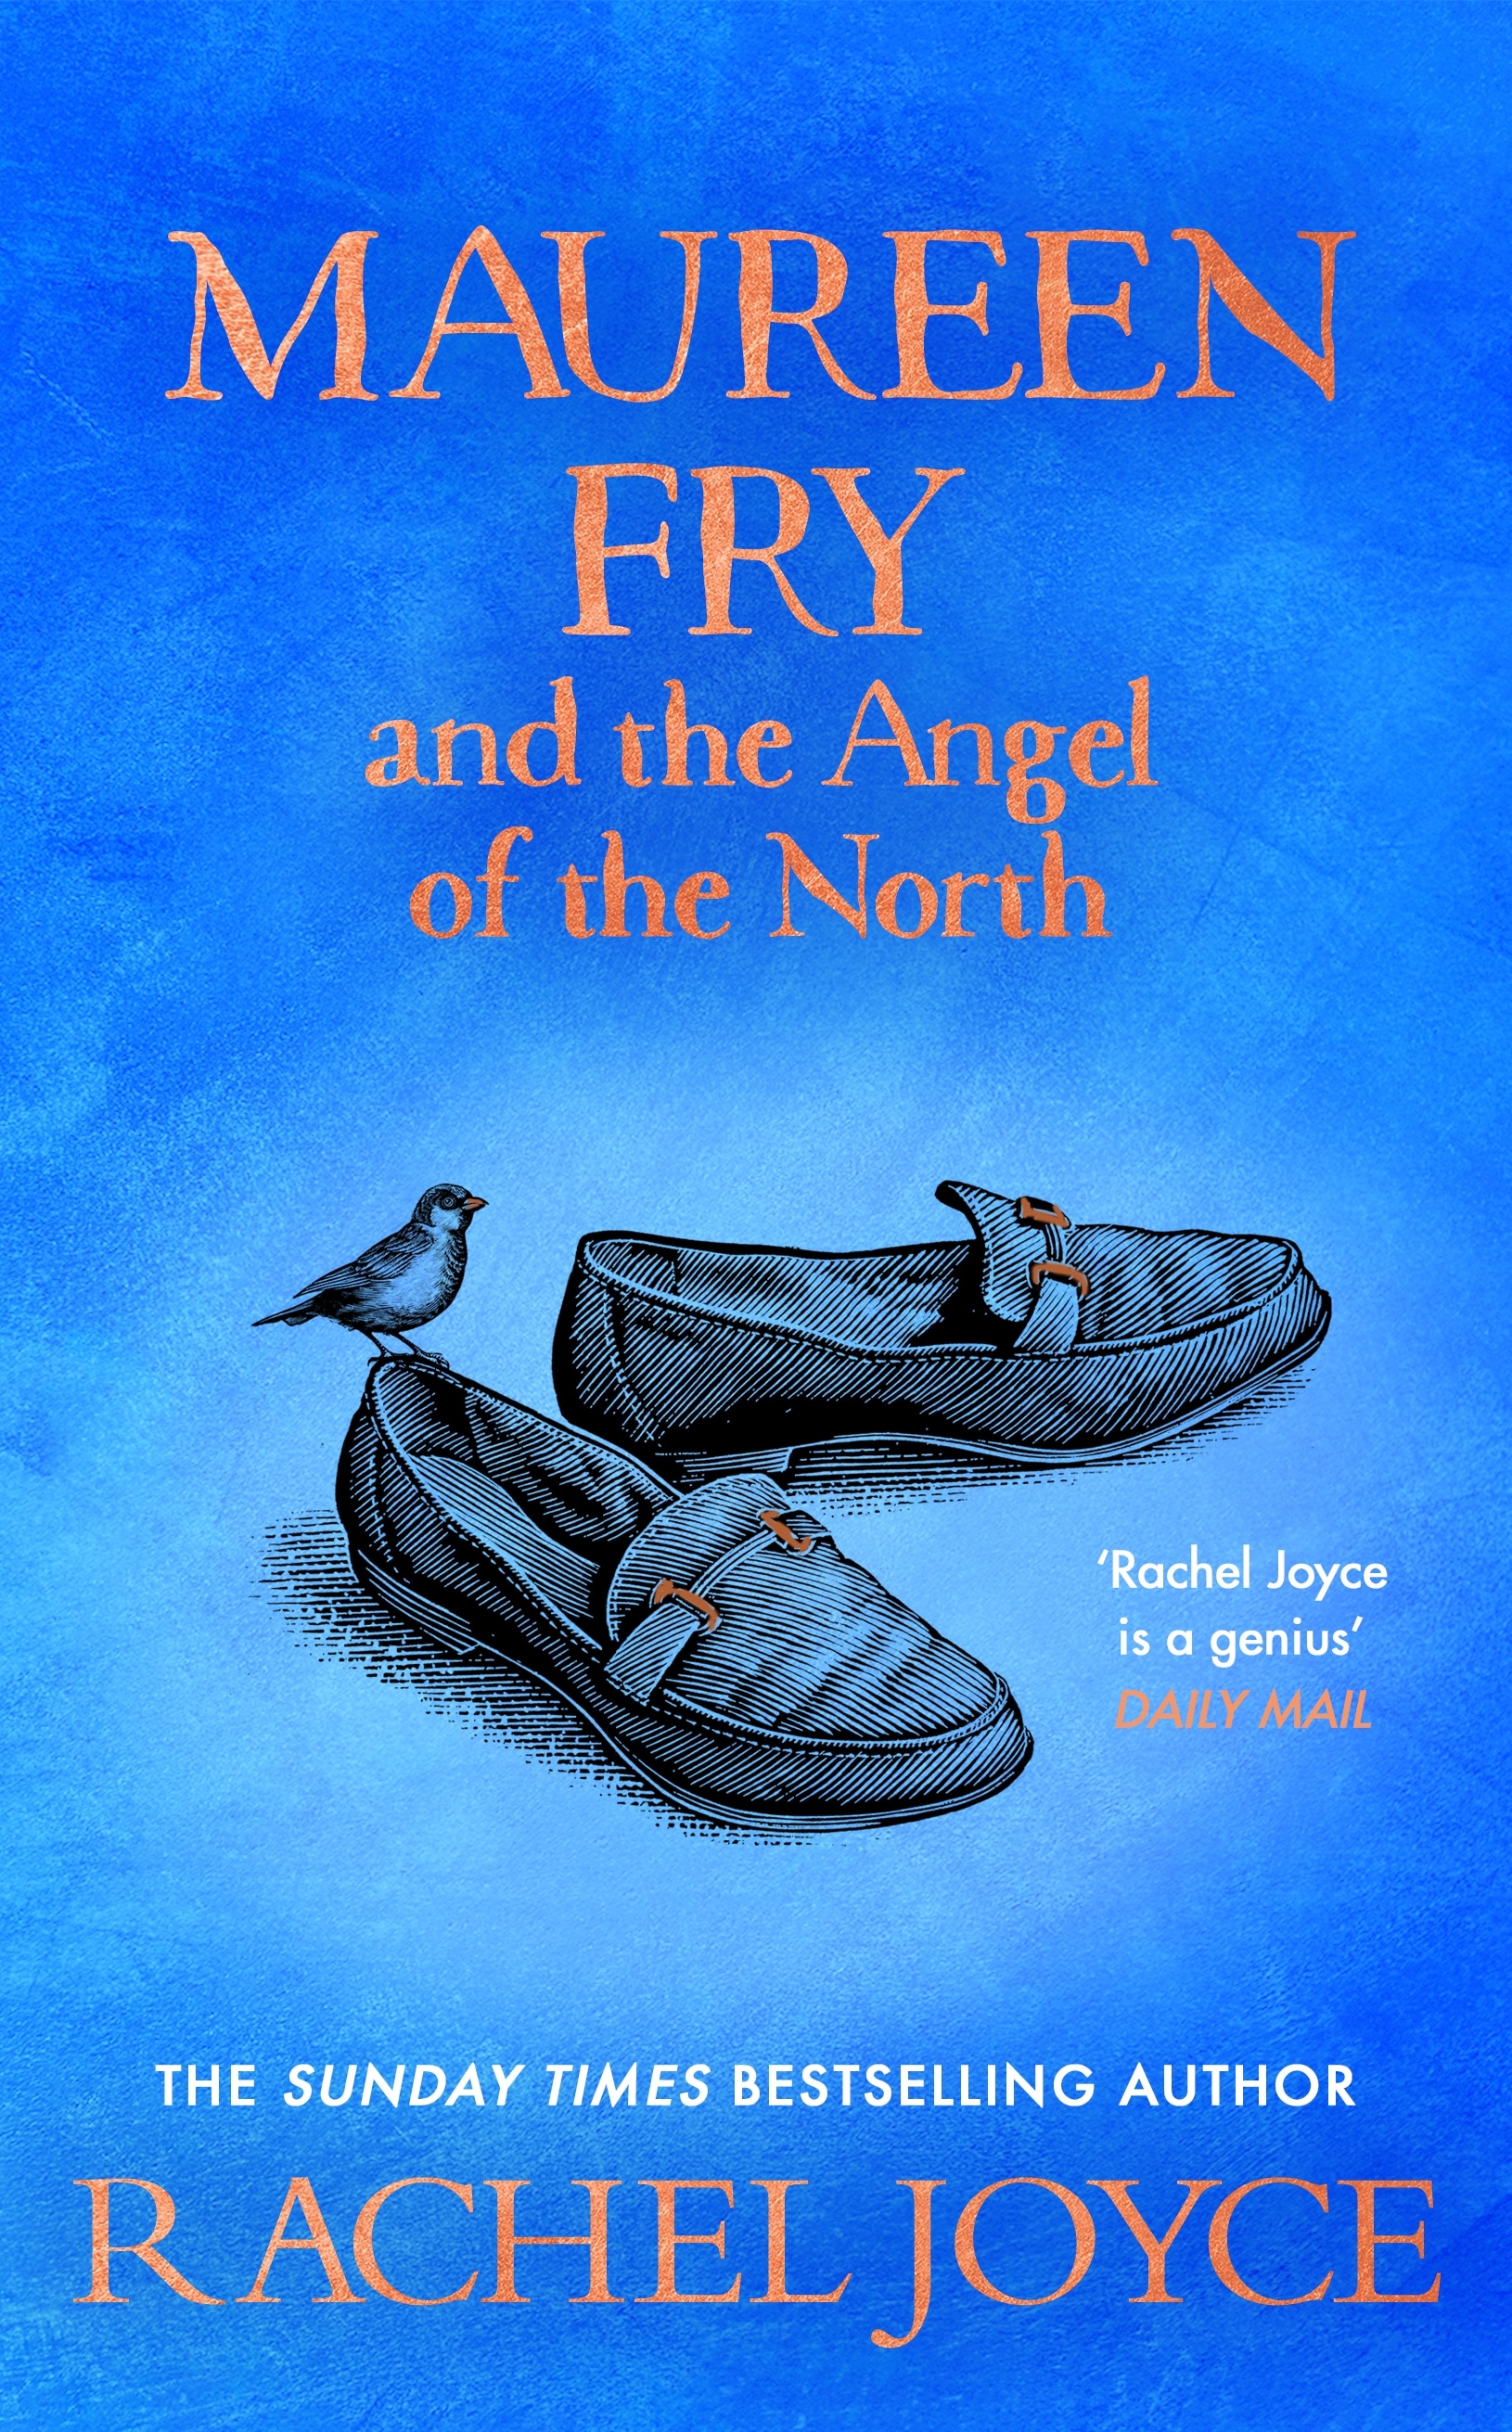 Book “Maureen Fry and the Angel of the North” by Rachel Joyce — October 20, 2022